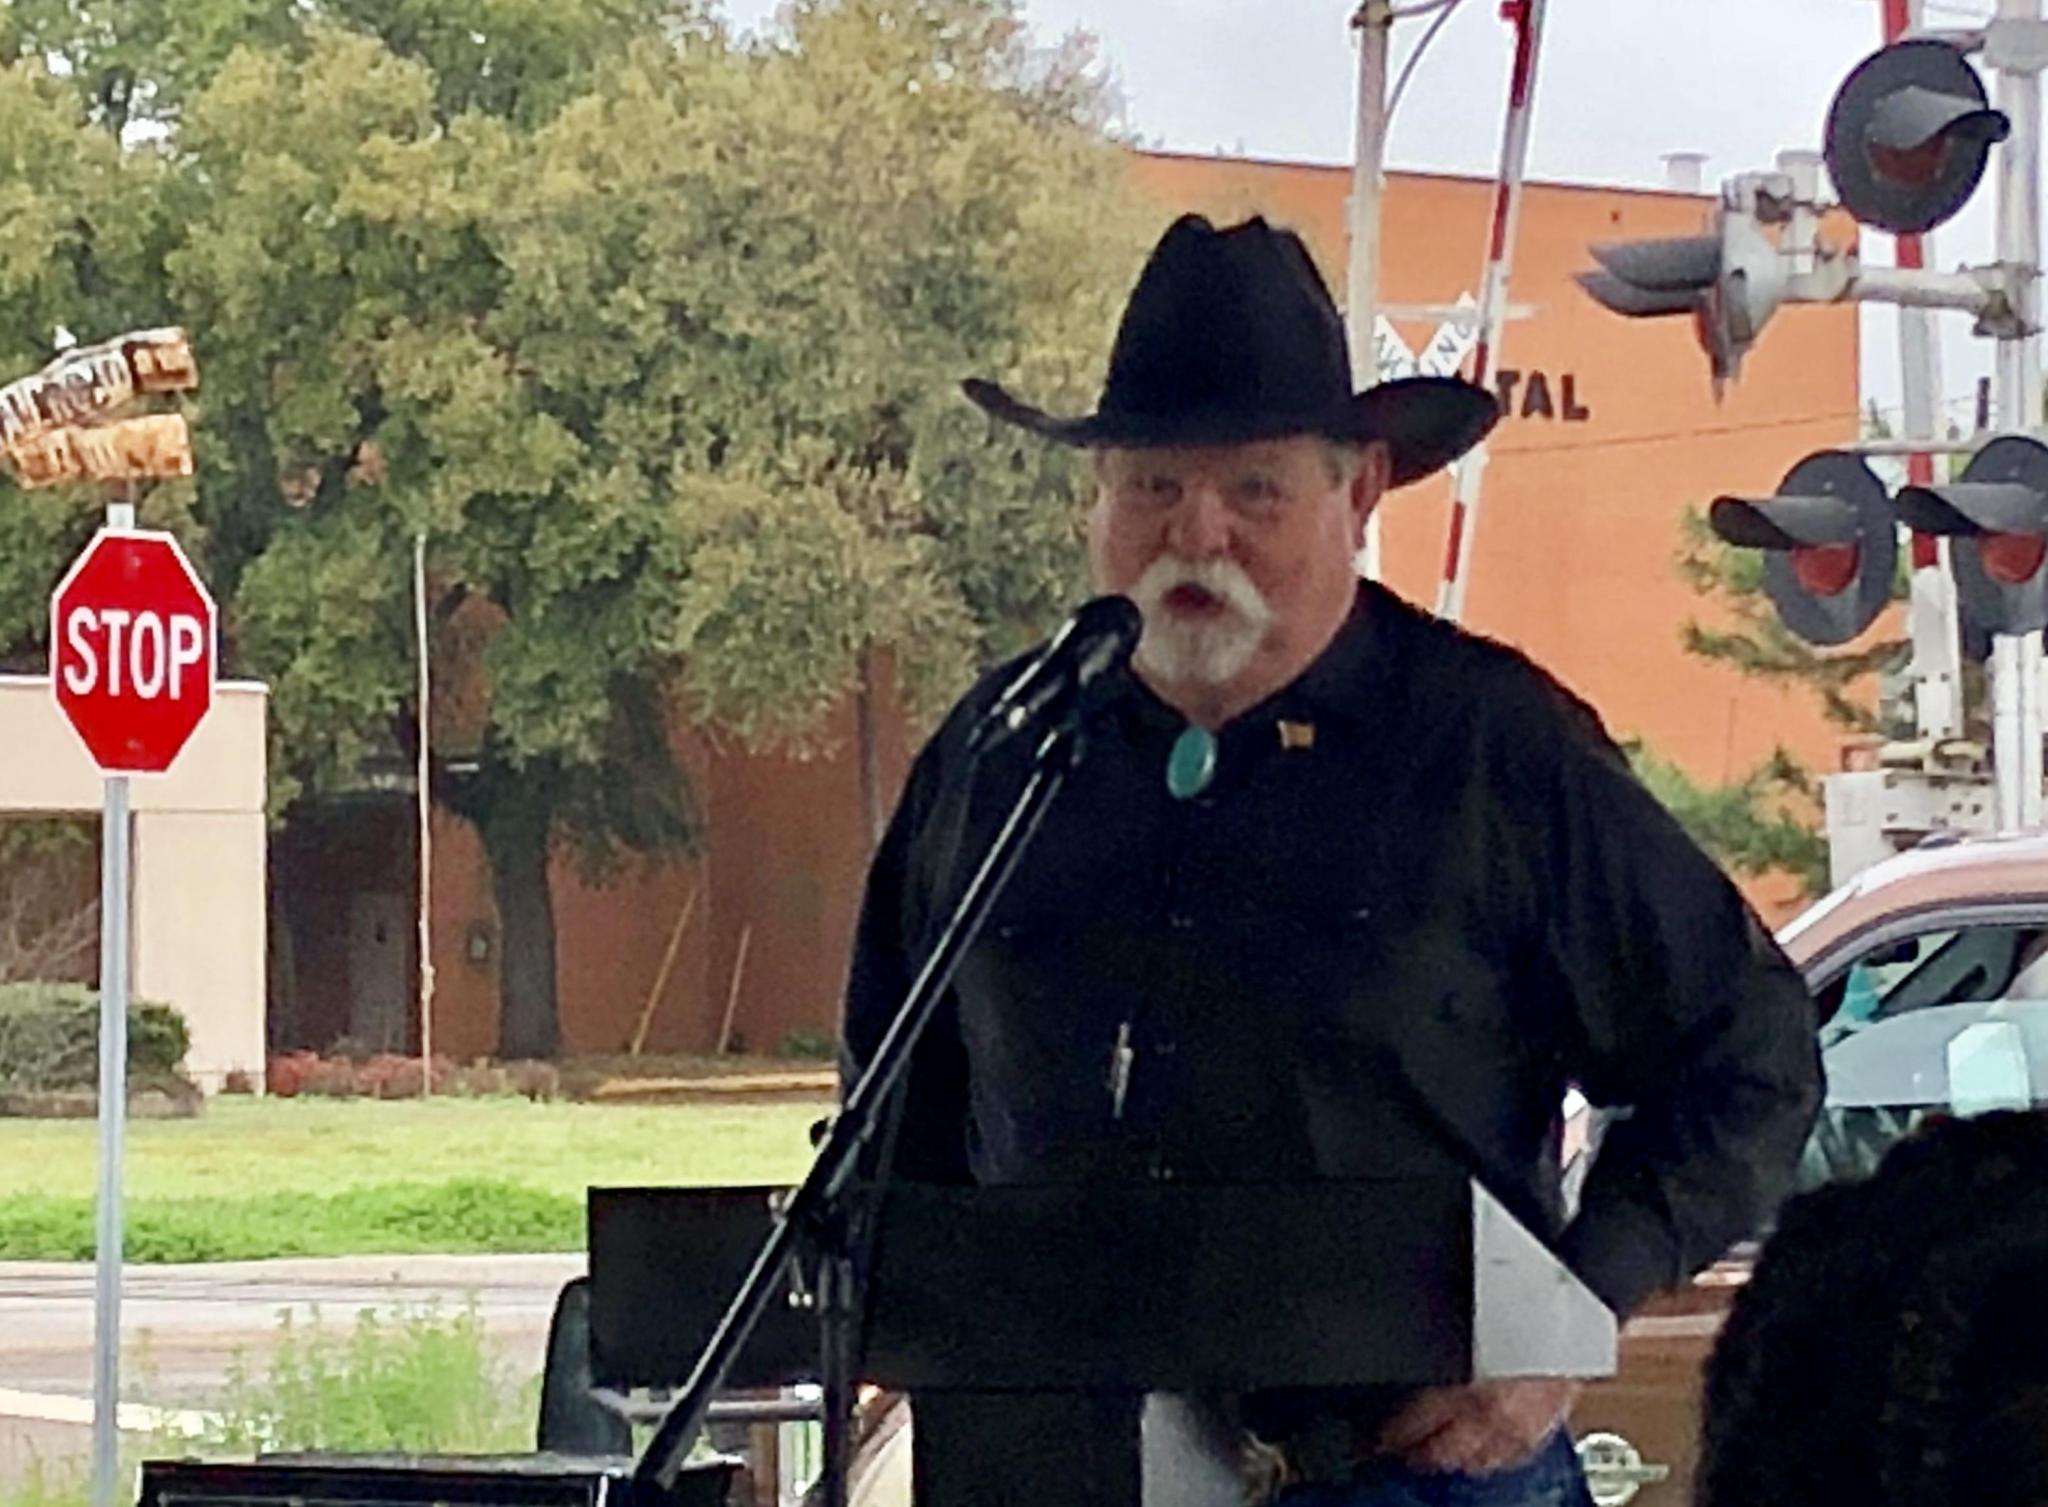 Ol Jim Cathey recited "Ragged Old Flag" by Johnny Cash.